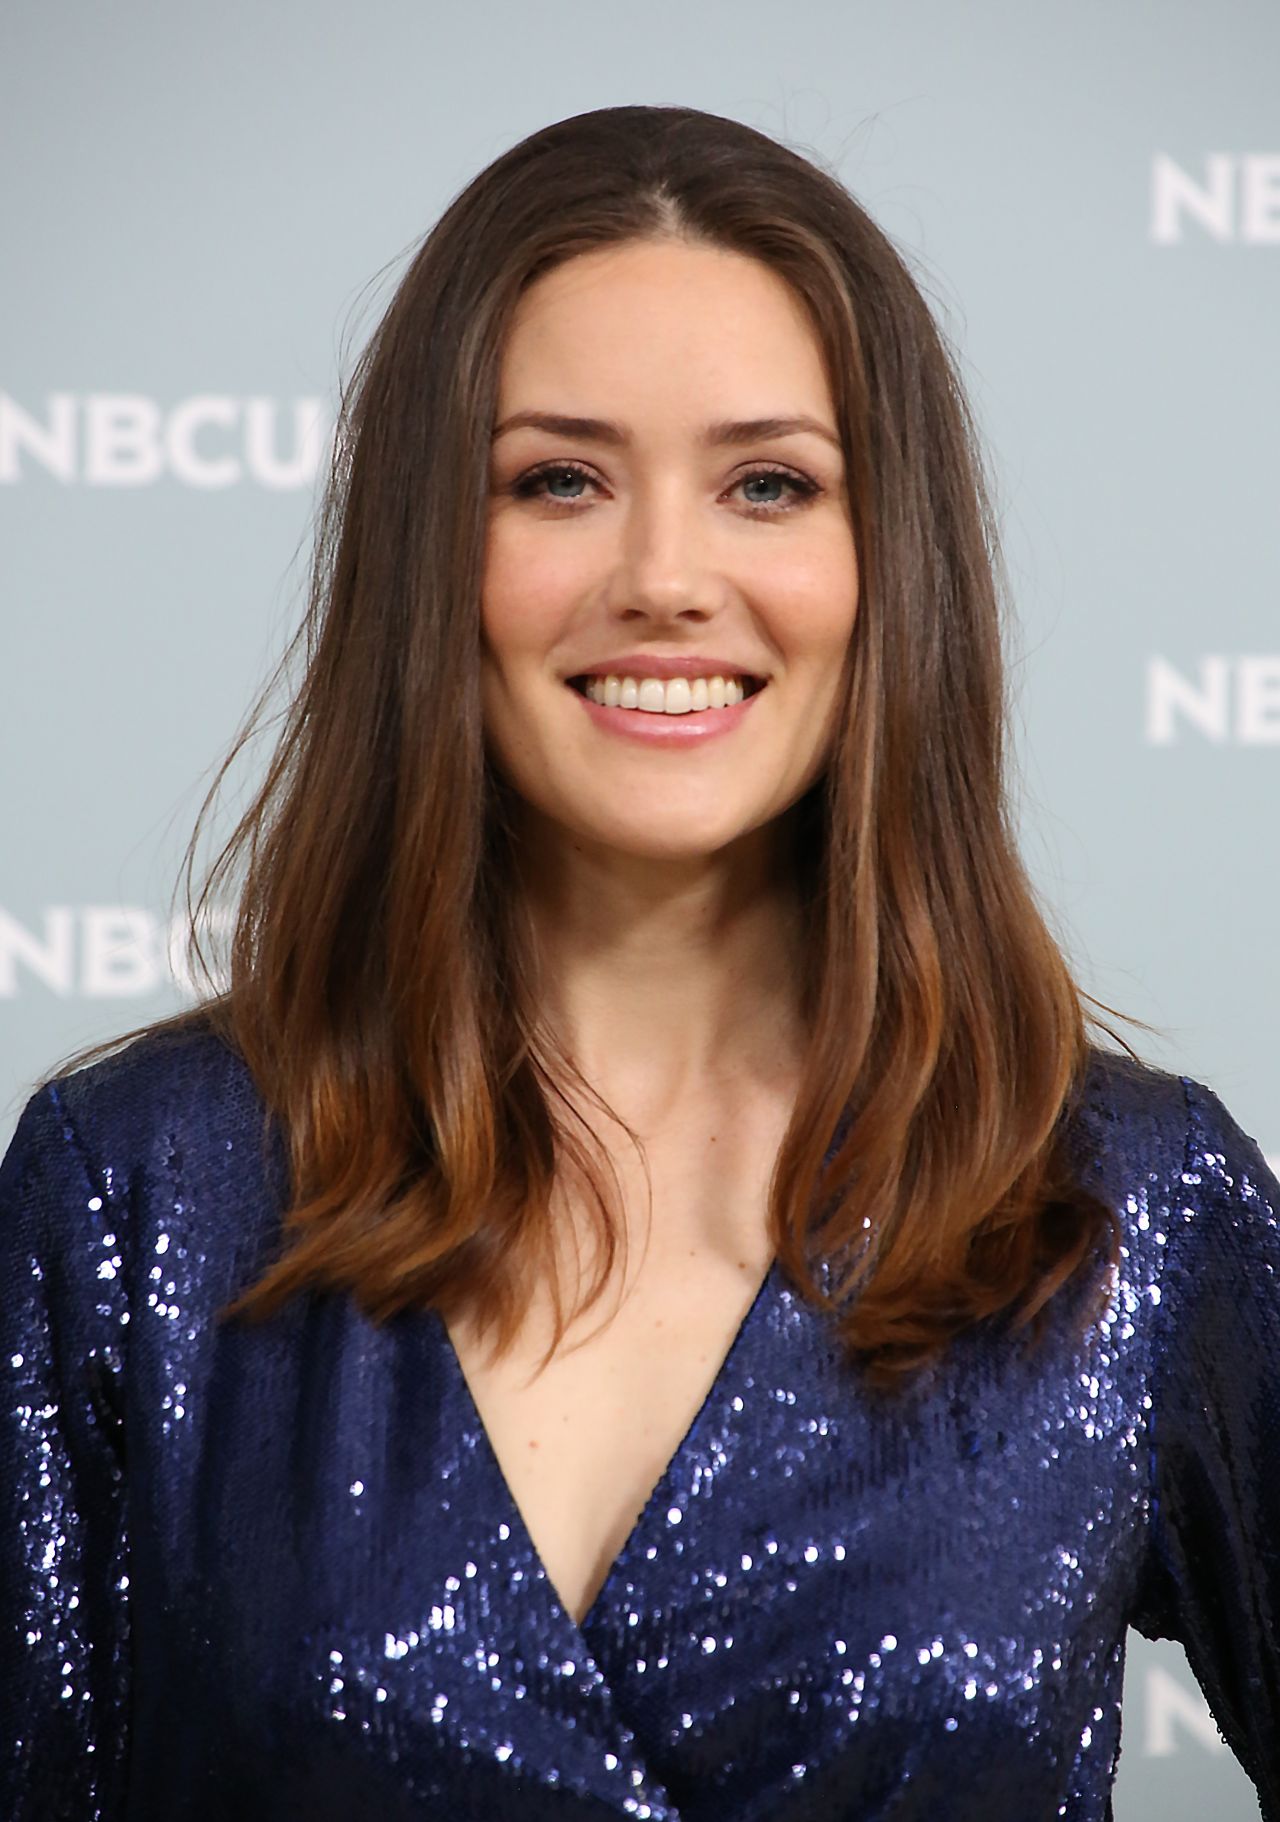 Megan Boone - 2018 NBCUniversal Upfront in NYC.